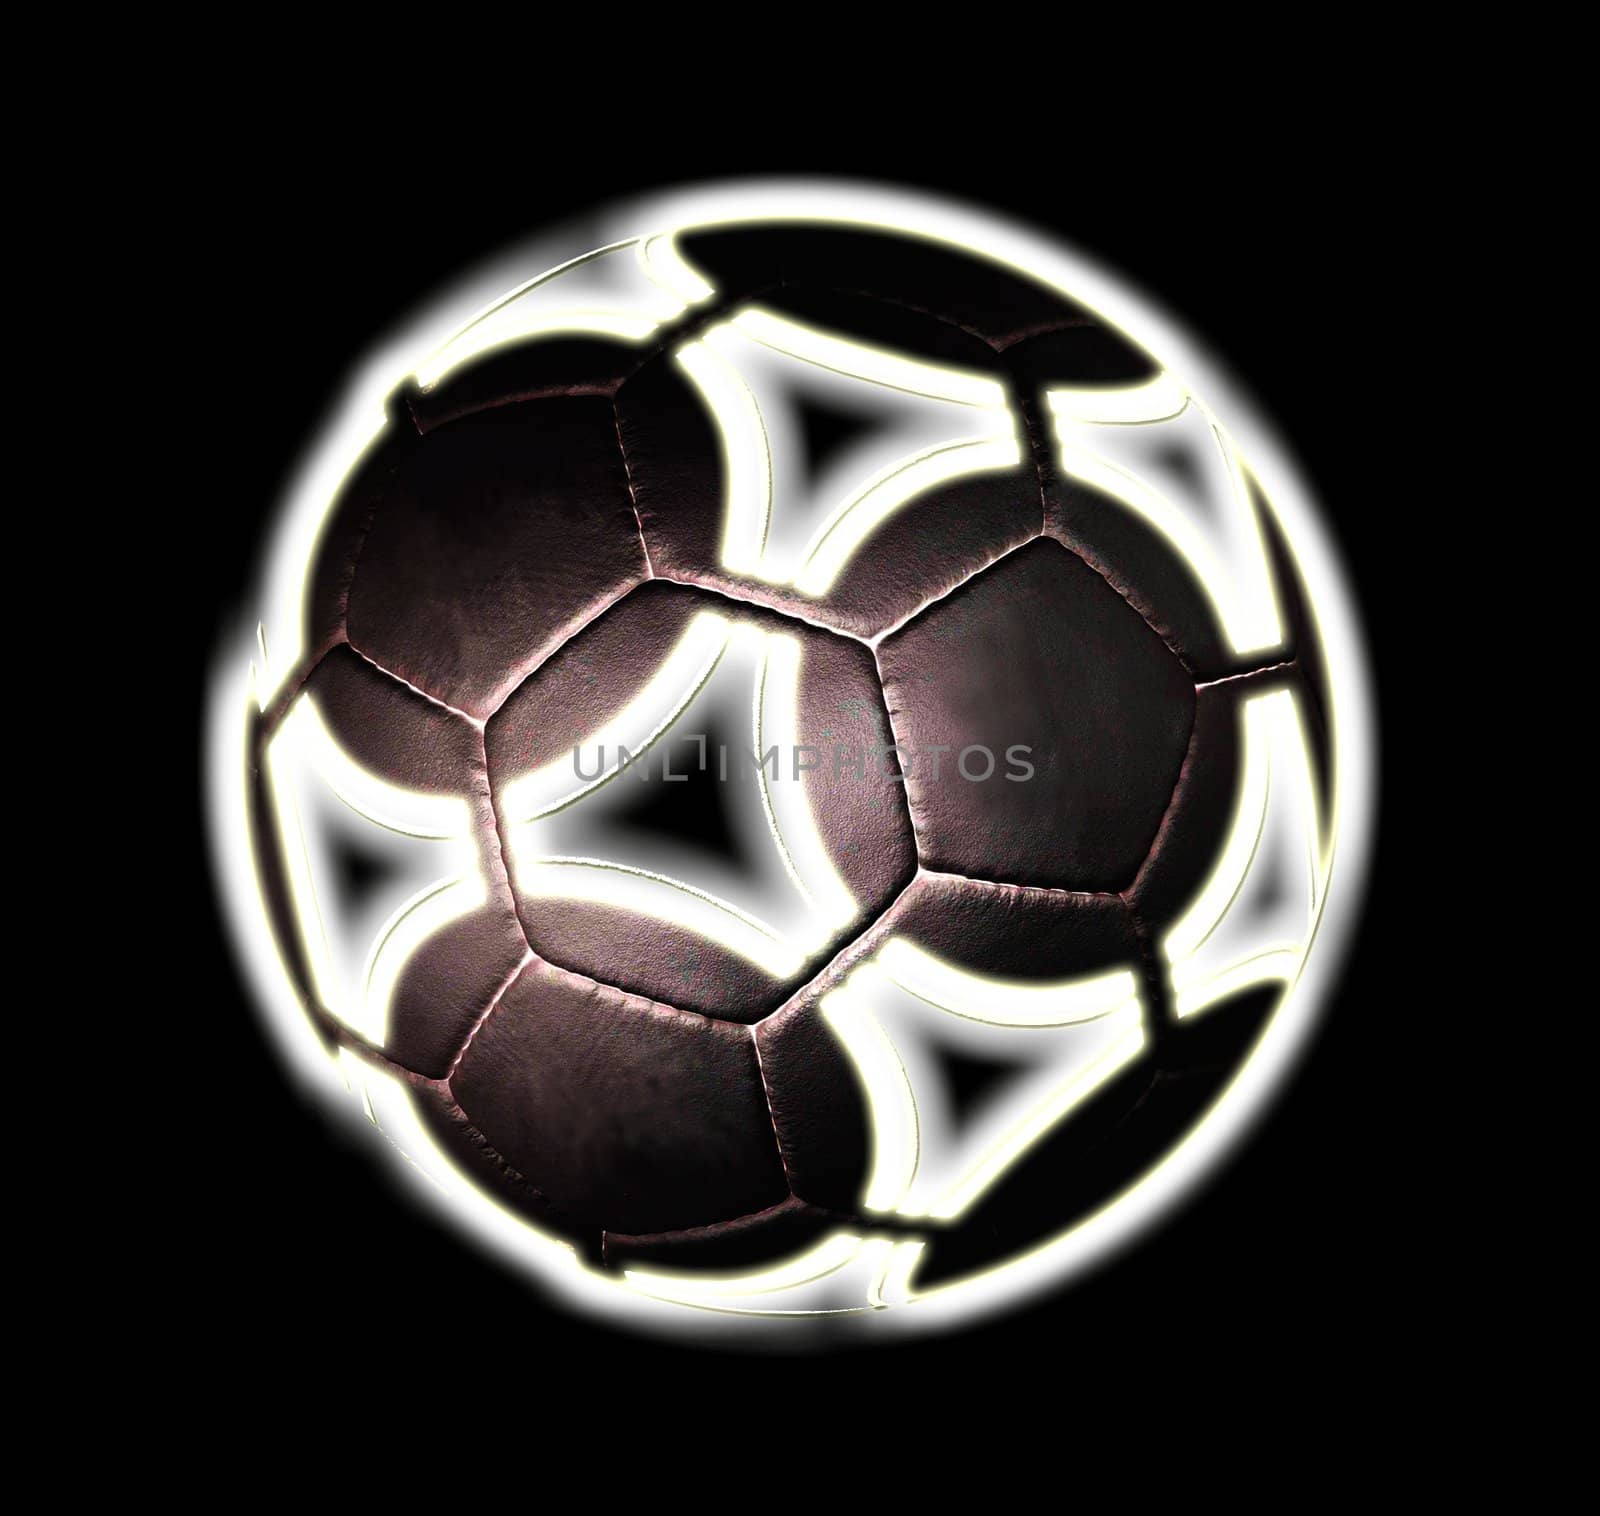 another type of football design.